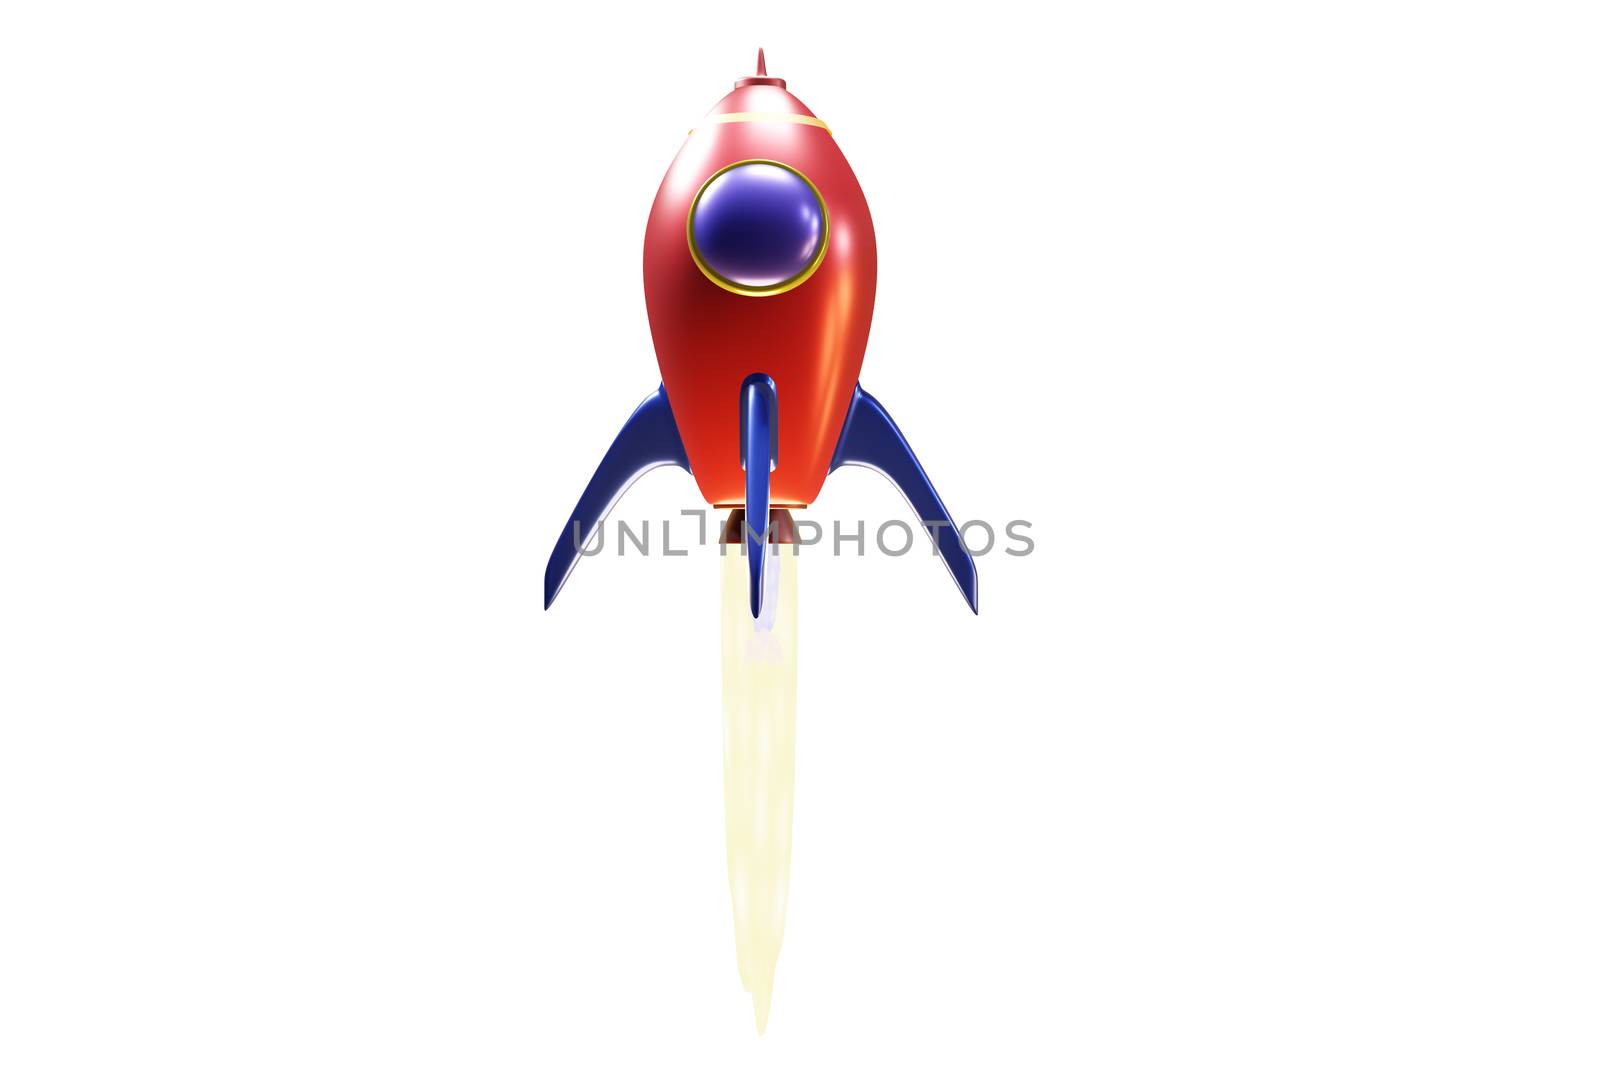 Ballistic launch red rocket on white isolated background, 3D ren by sirawit99